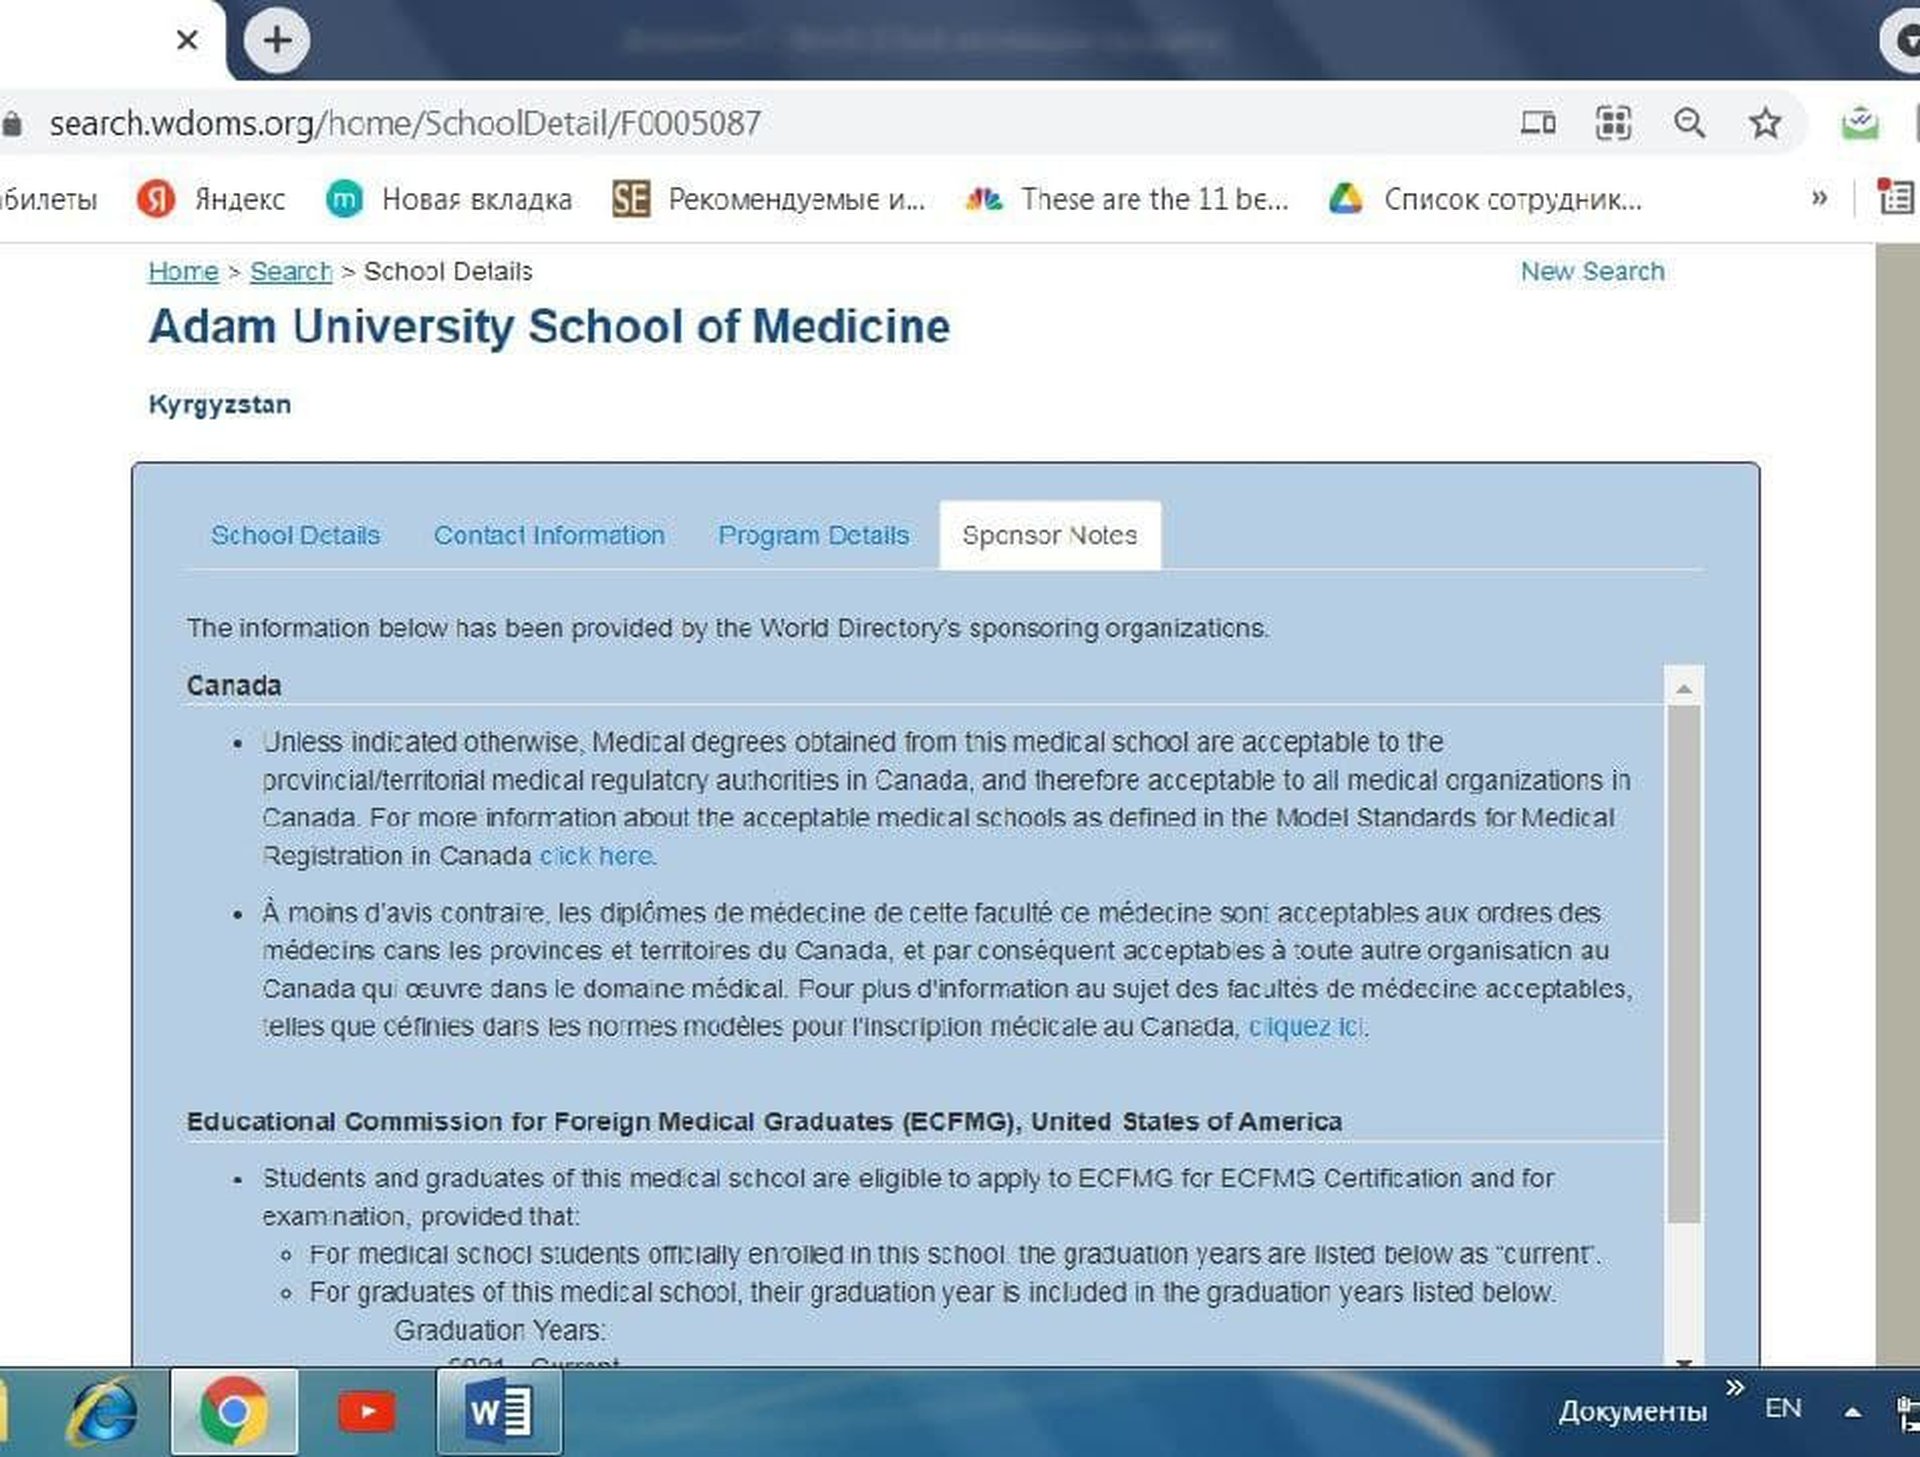 Students and graduates of ADAM University School of Medicine are eligible to apply to Educational Commission for Foreign Medical Graduates(ECFMG) for ECFMG Certification